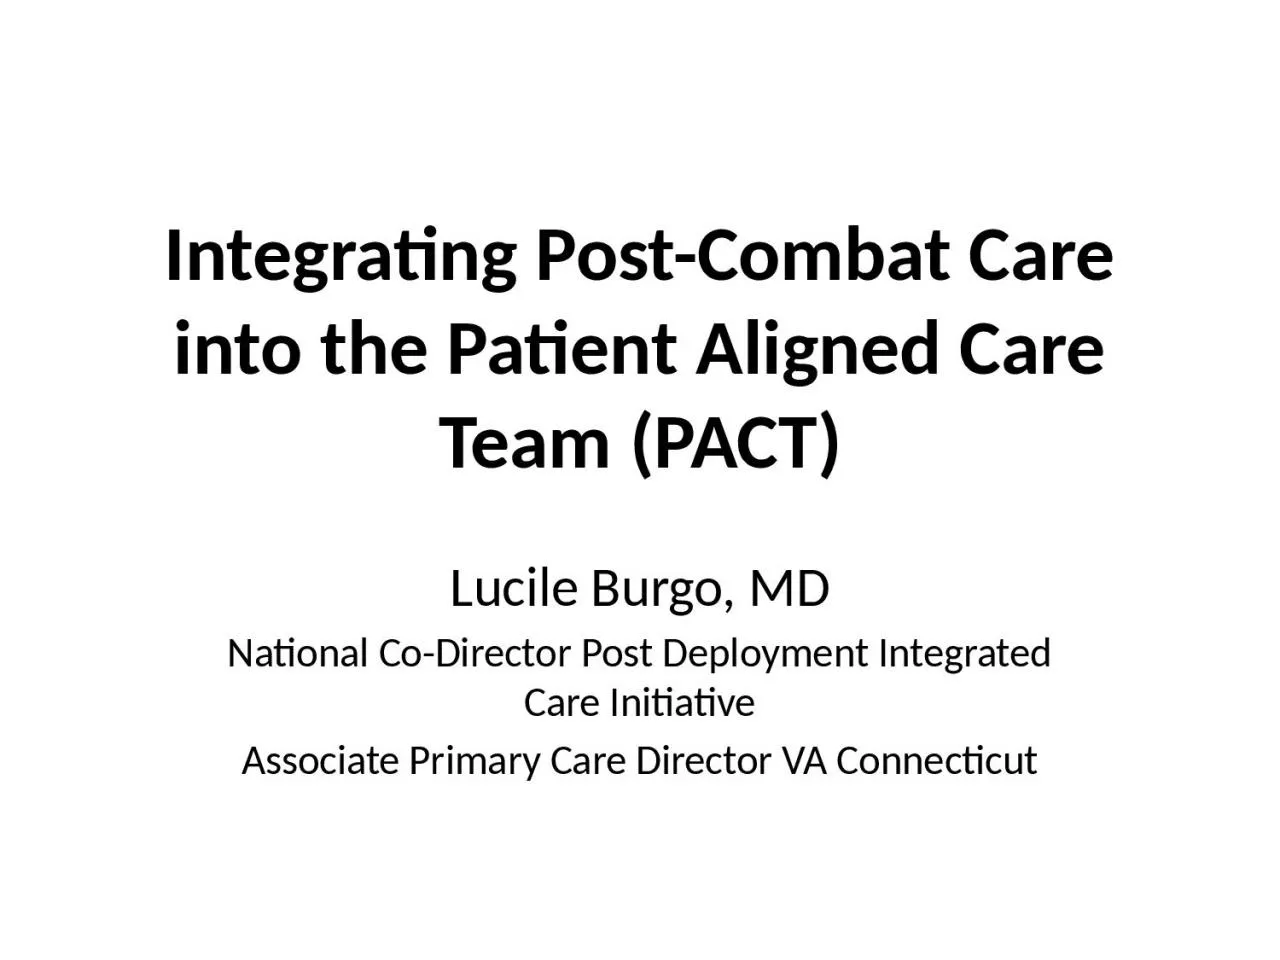 Integrating Post-Combat Care into the Patient Aligned Care Team (PACT)